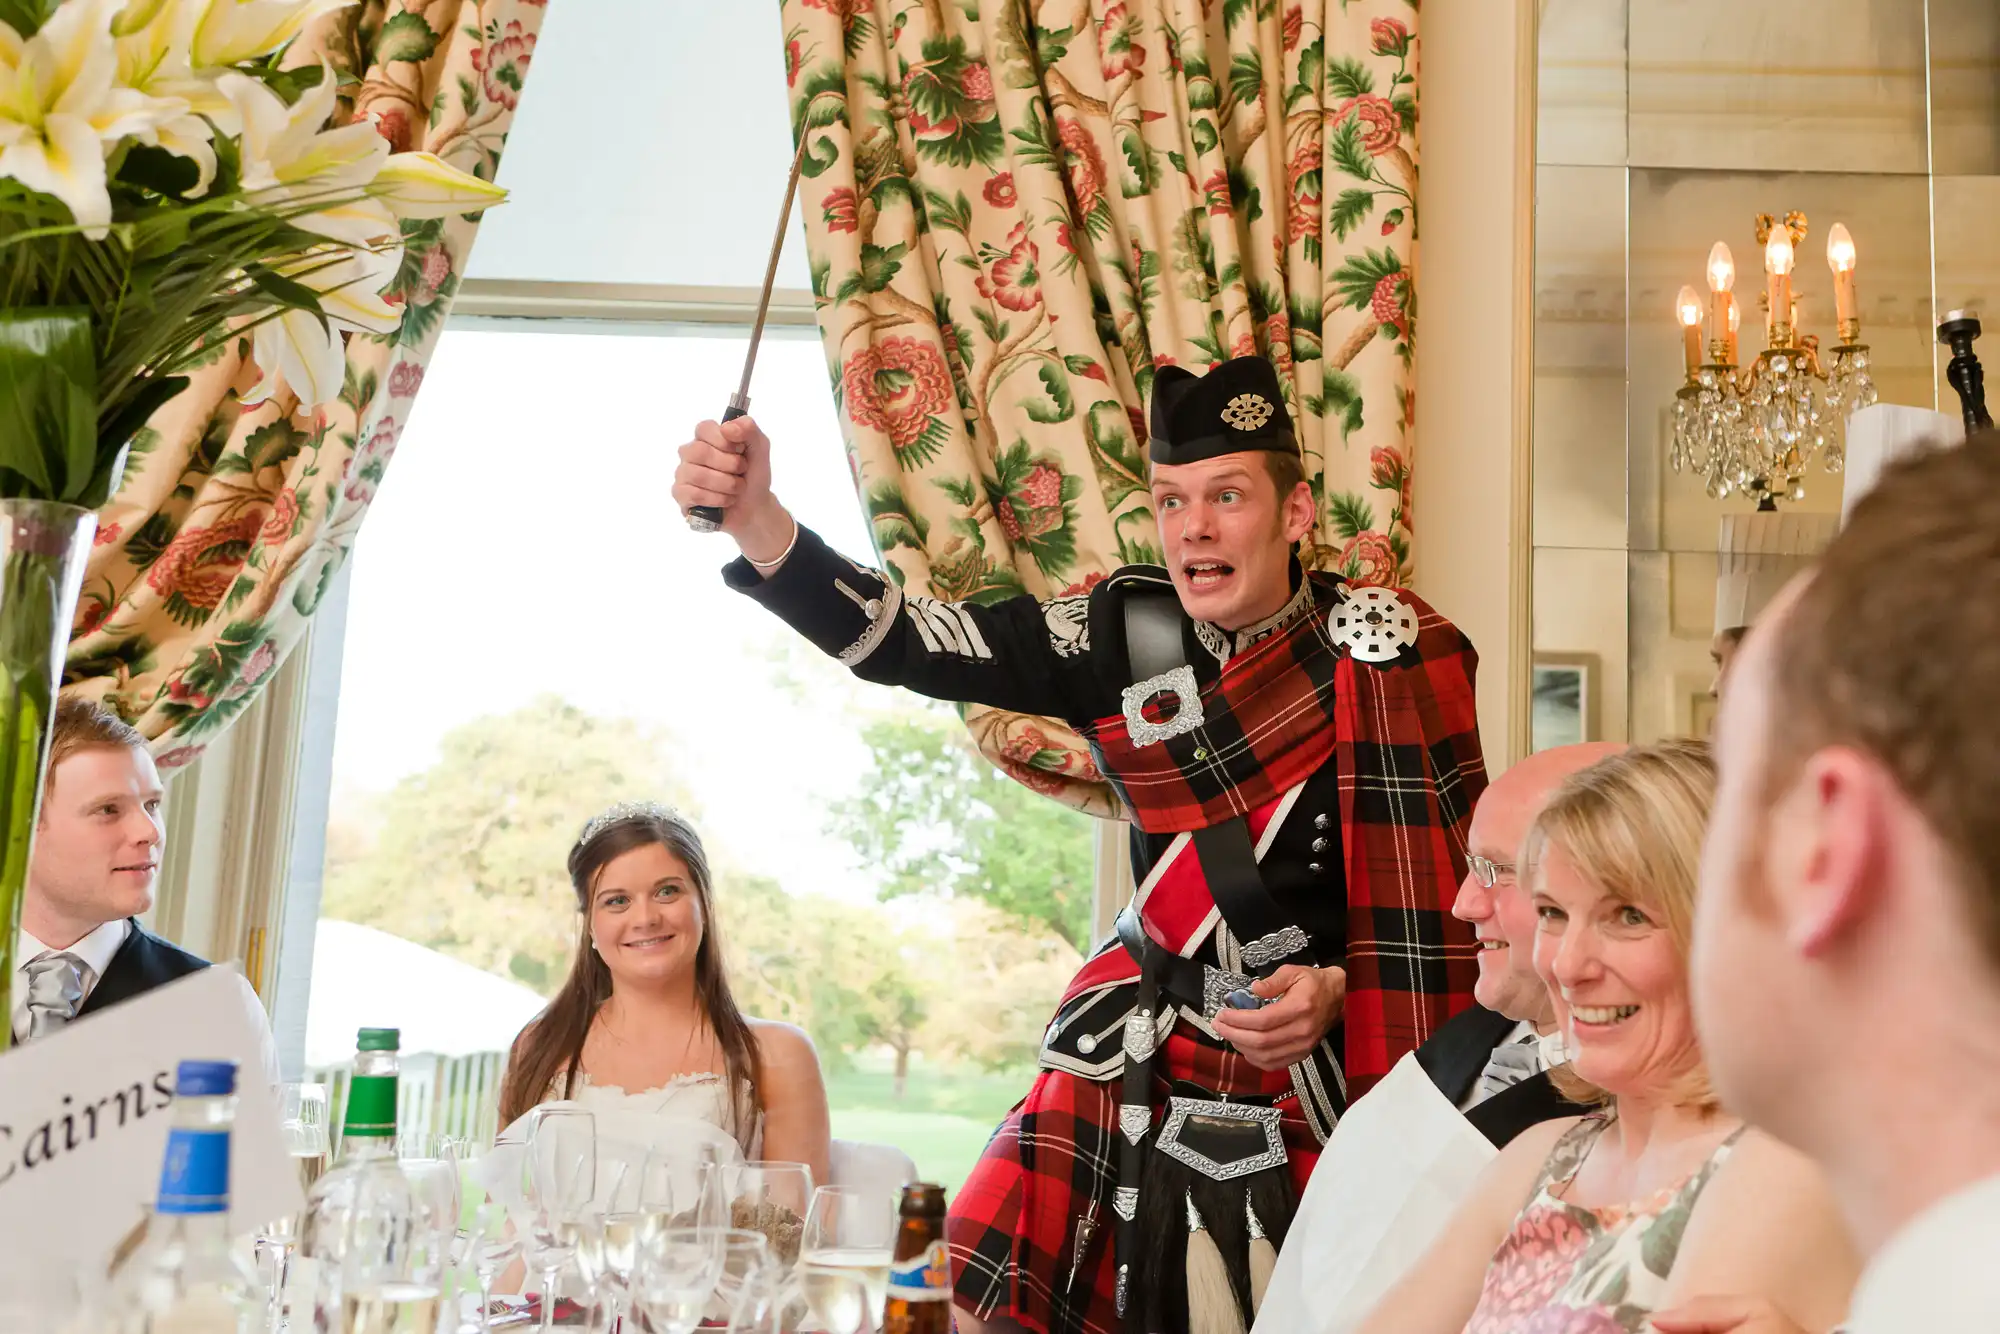 A man in a kilt and sporran enthusiastically raises a knife while giving a speech at a wedding reception, with guests smiling around him.